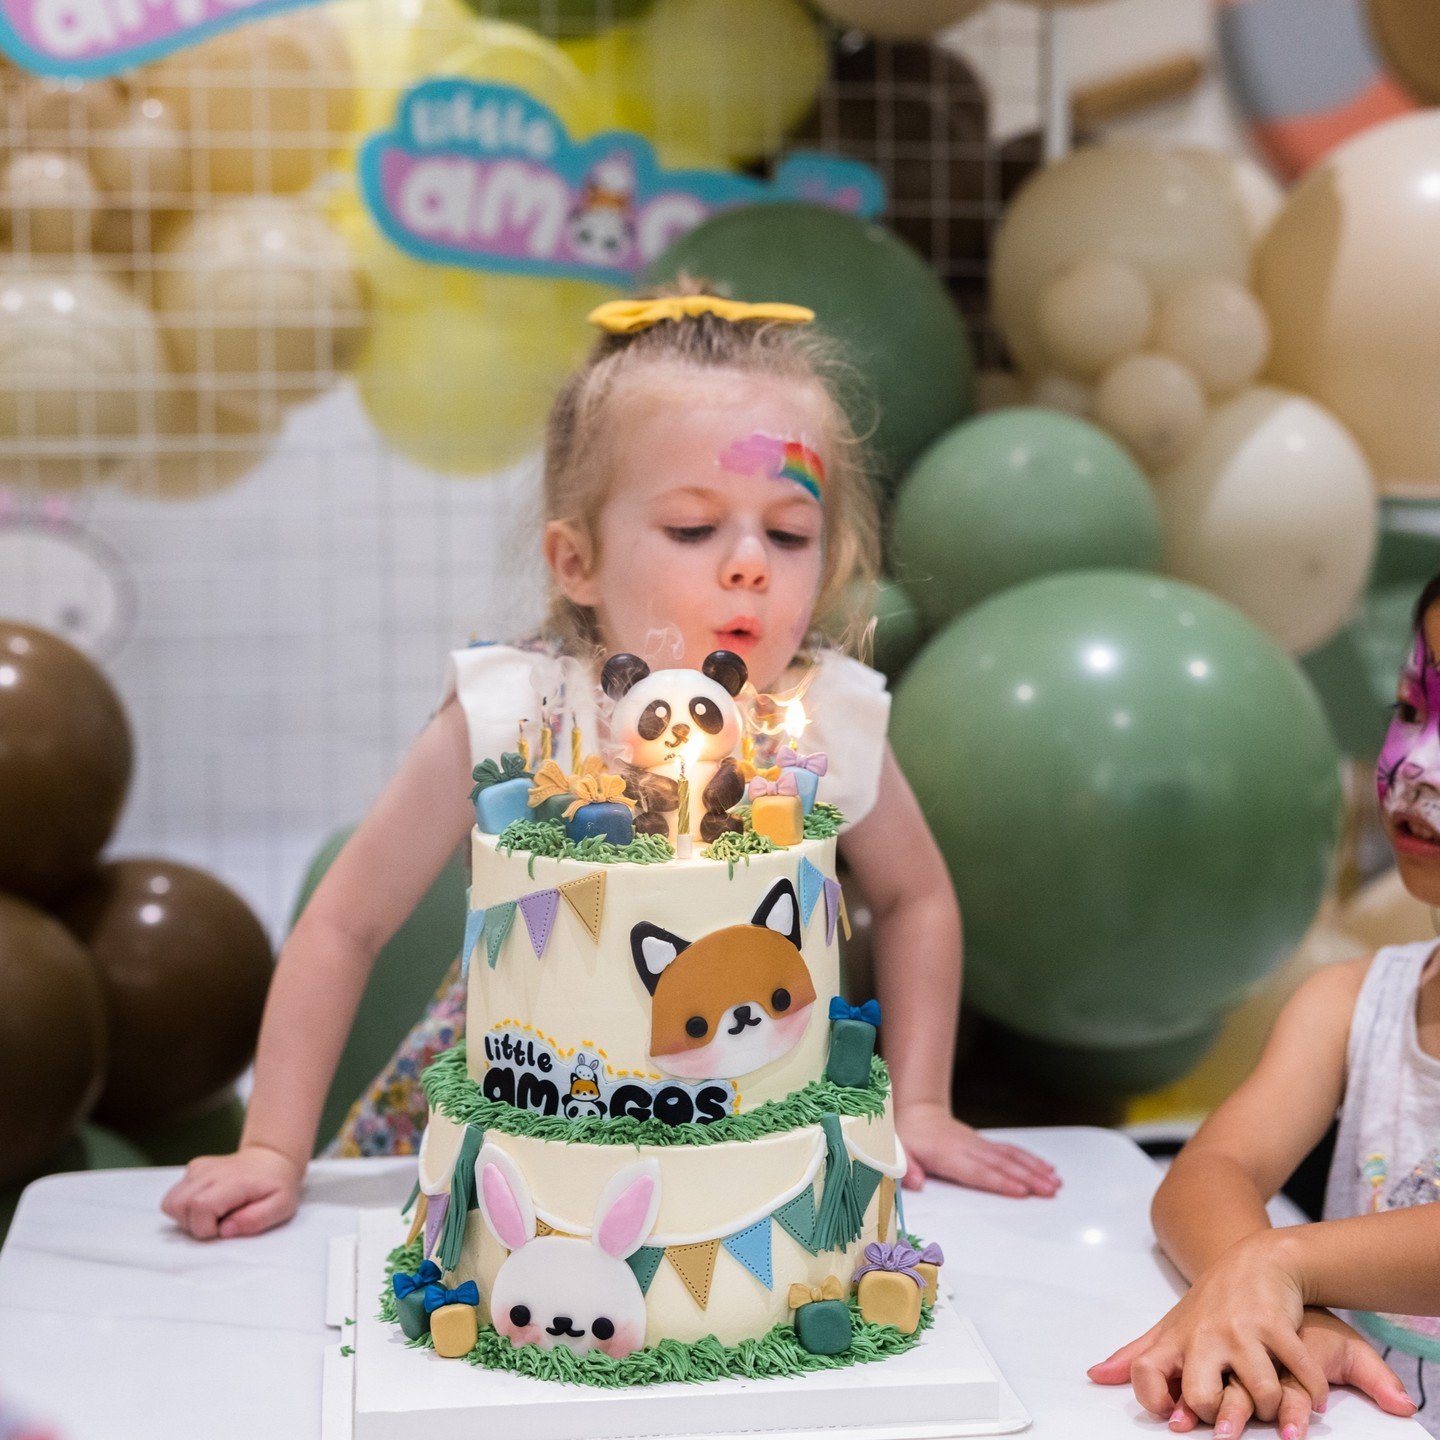 Make your little one's birthday dreams come true at Little Amigos! 🎈

Imagine a stress-free celebration where kids can play, create, and make unforgettable memories with friends and family. Our vibrant and safe play area, delicious food options, and